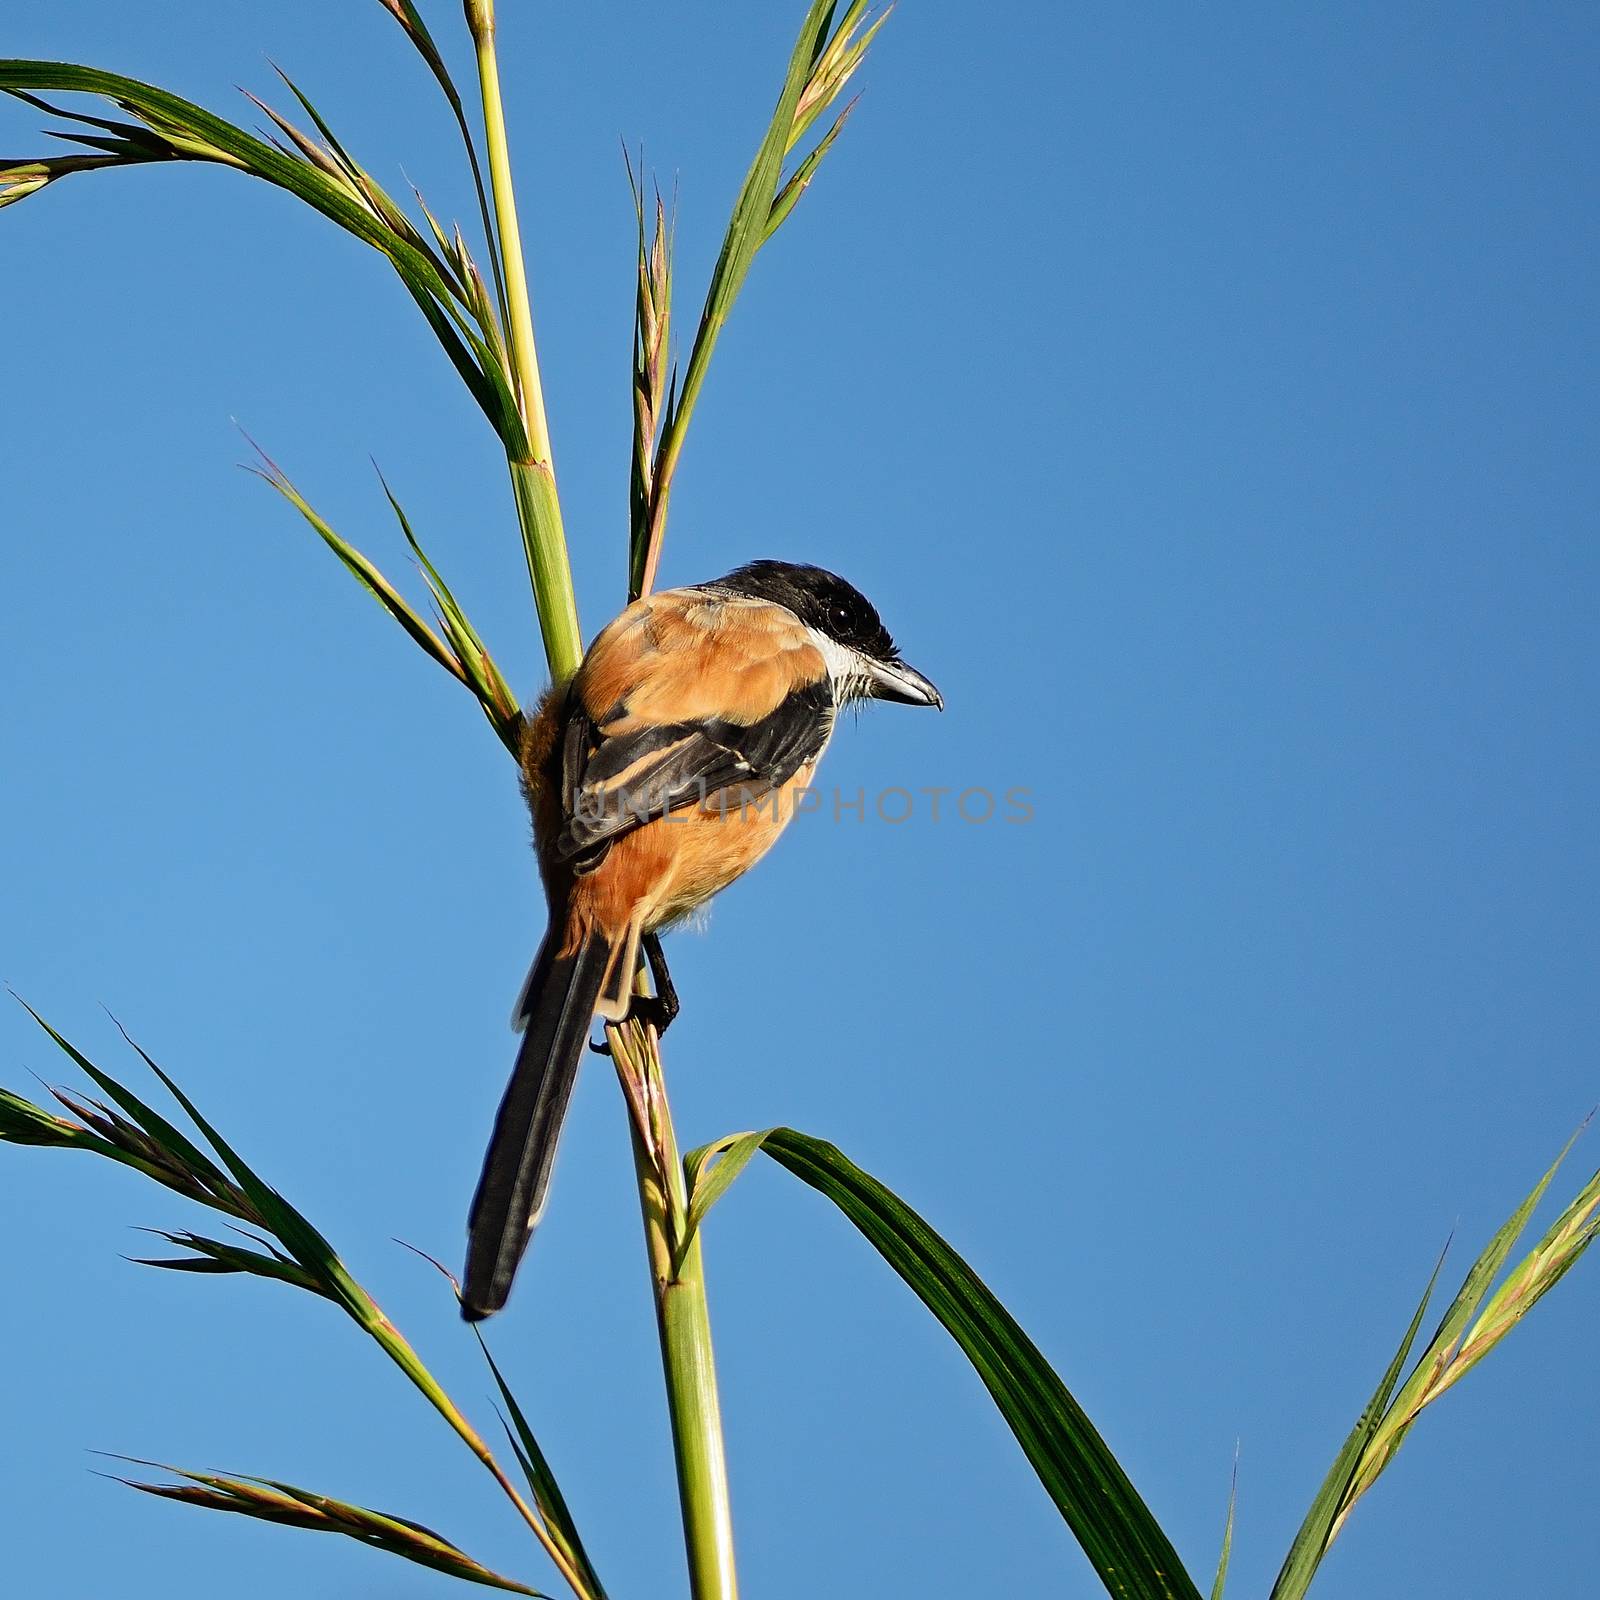 Long-tailed Shrike (Lanius schach), standing on the grass branch